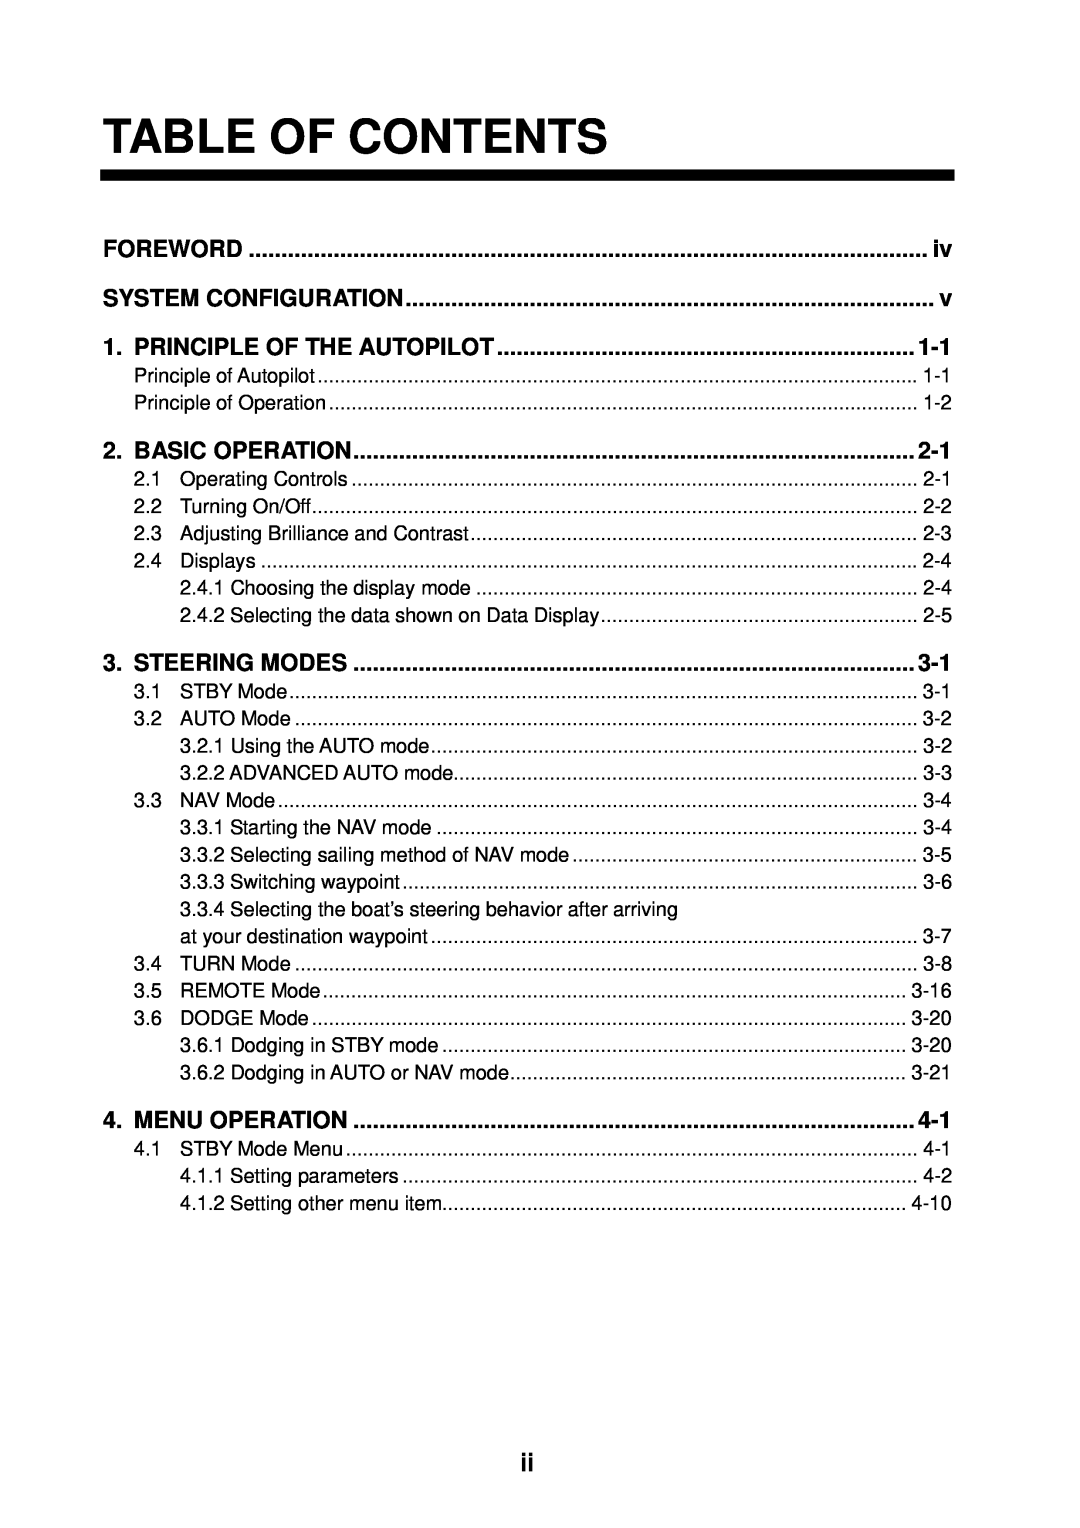 Furuno 520 Table Of Contents, Principle Of The Autopilot, Foreword, System Configuration, Basic Operation, Steering Modes 